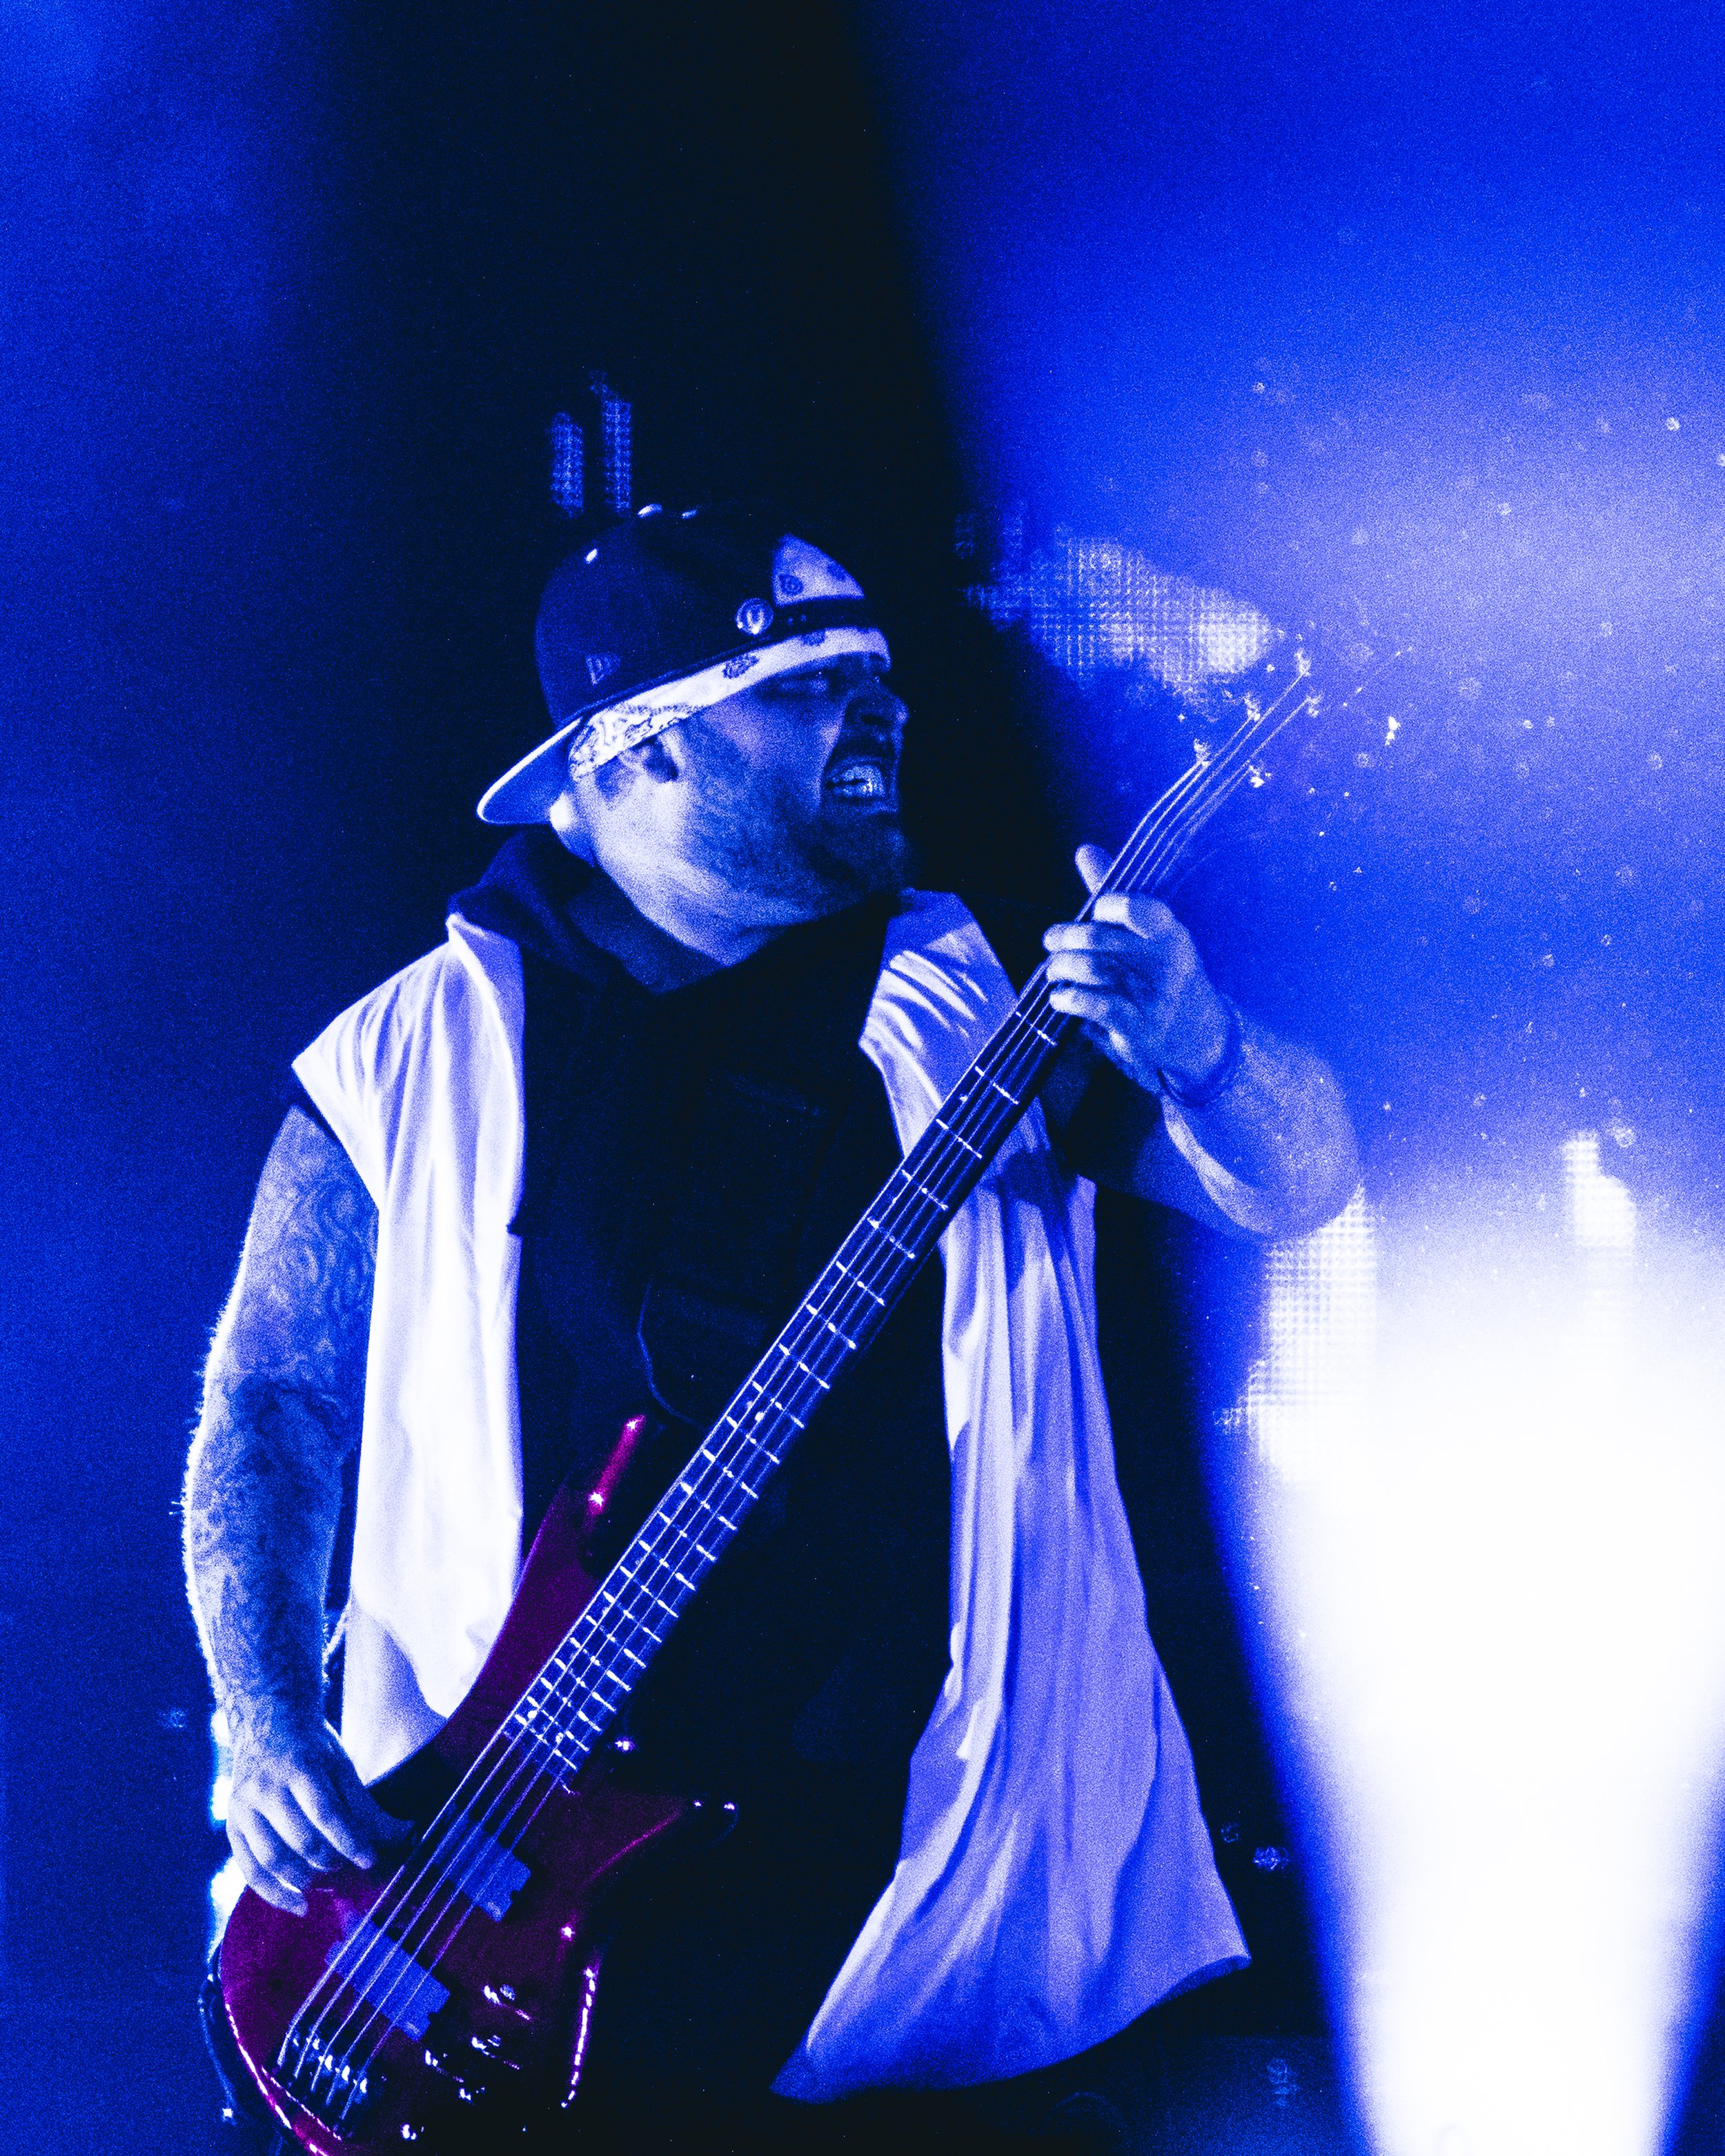 KORN - 2022 NORTH AMERICAN TOUR - Ball Arena - Denver, Colorado - Tuesday, August 16, 2022 - PHOTO BY Mowgli Miles of Interracial Friends - PHOTO BY Mowgli Miles of Interracial Friends-114.JPG